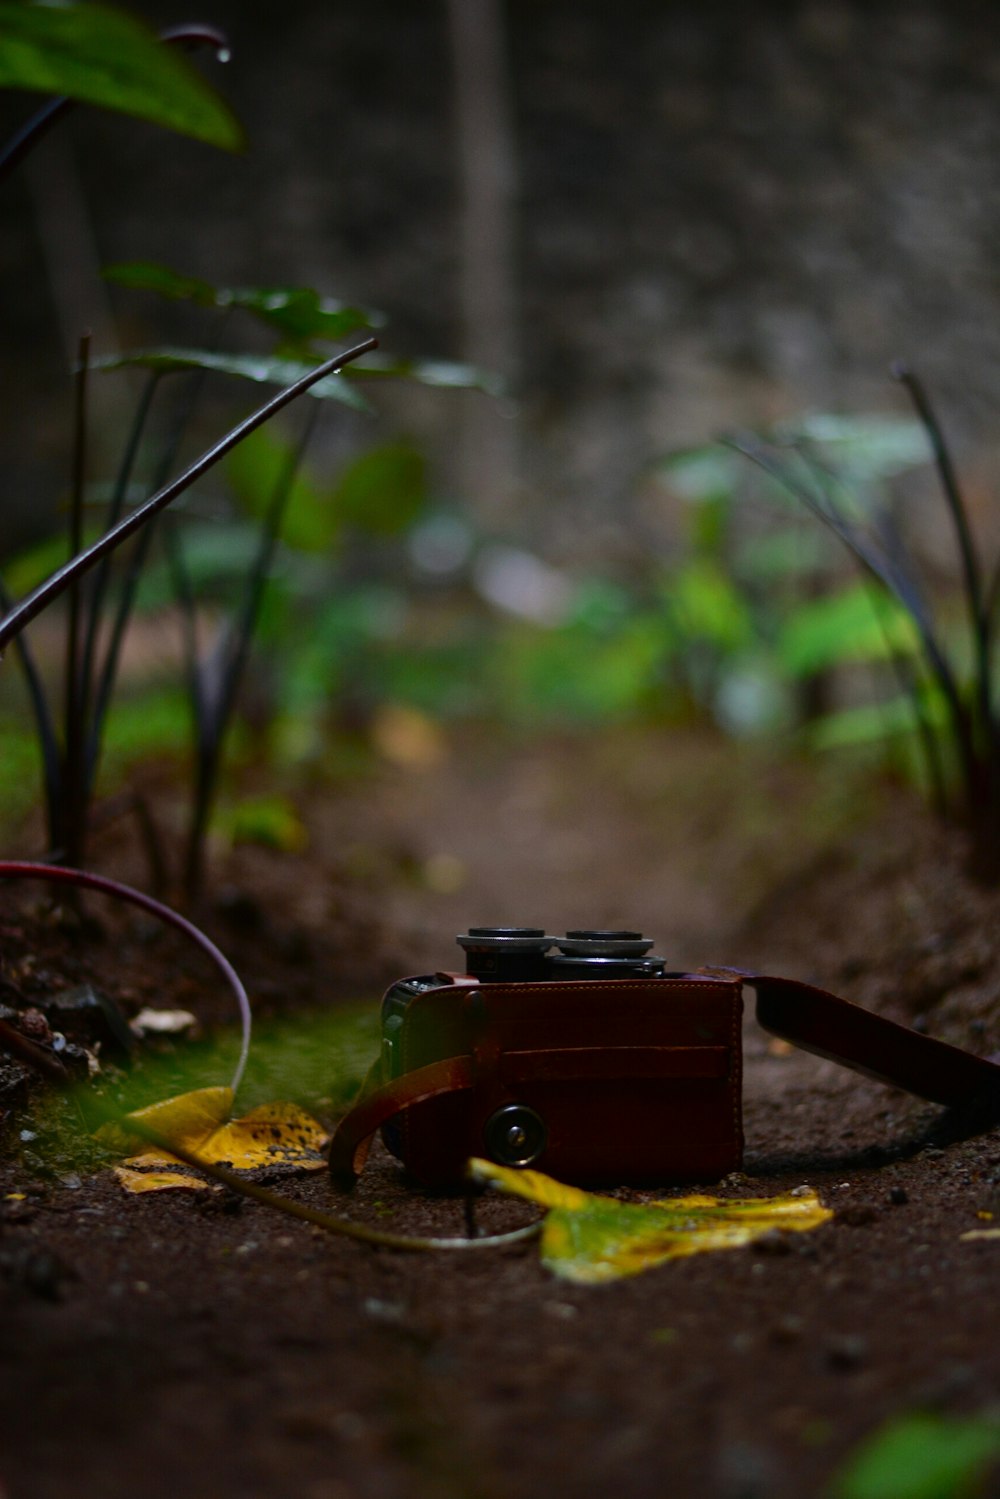 red camera on ground near green plants